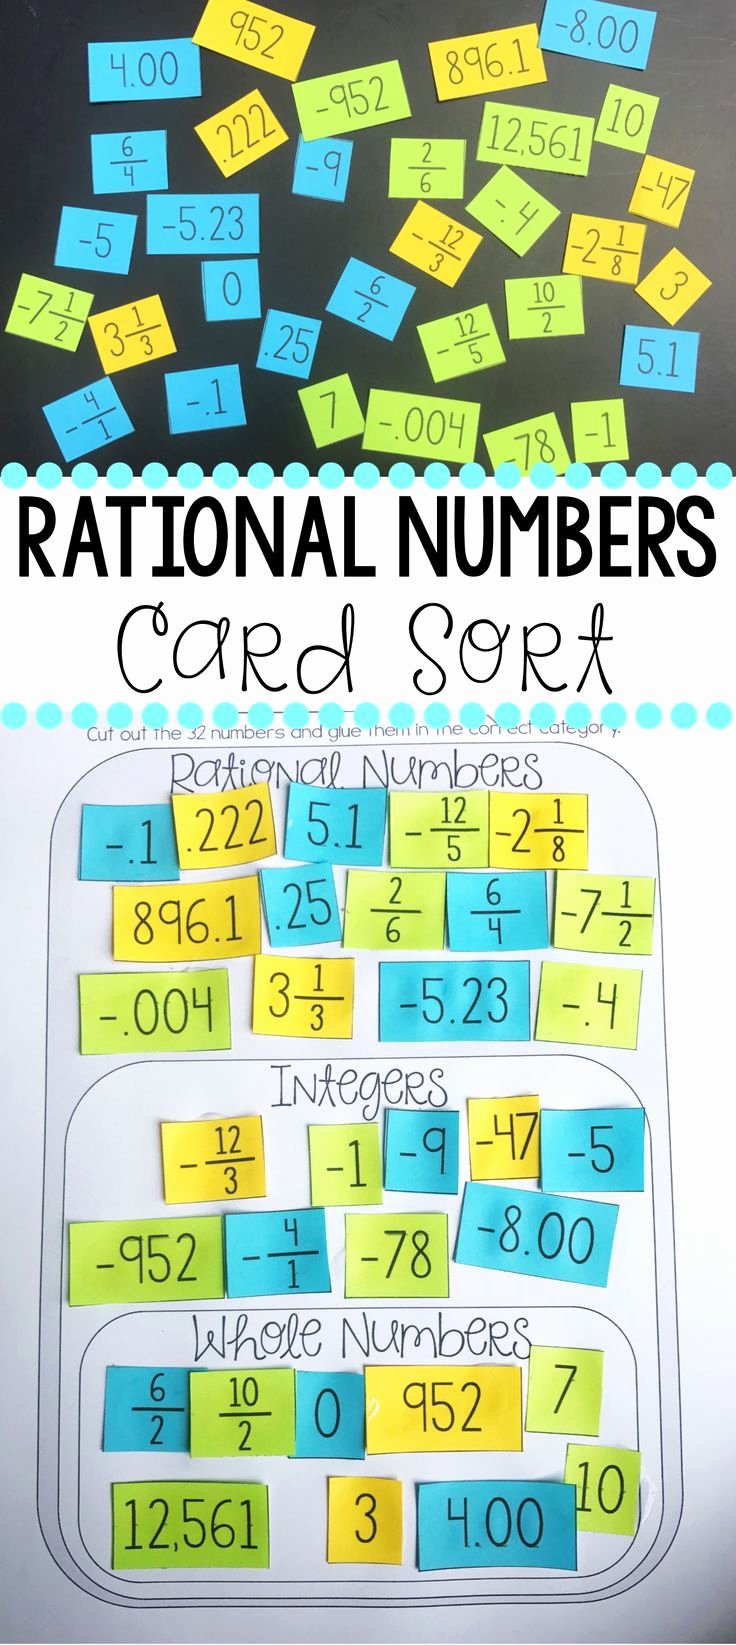 Classifying Rational Numbers Worksheet Unique Classifying Rational Numbers Card sort Rational whole